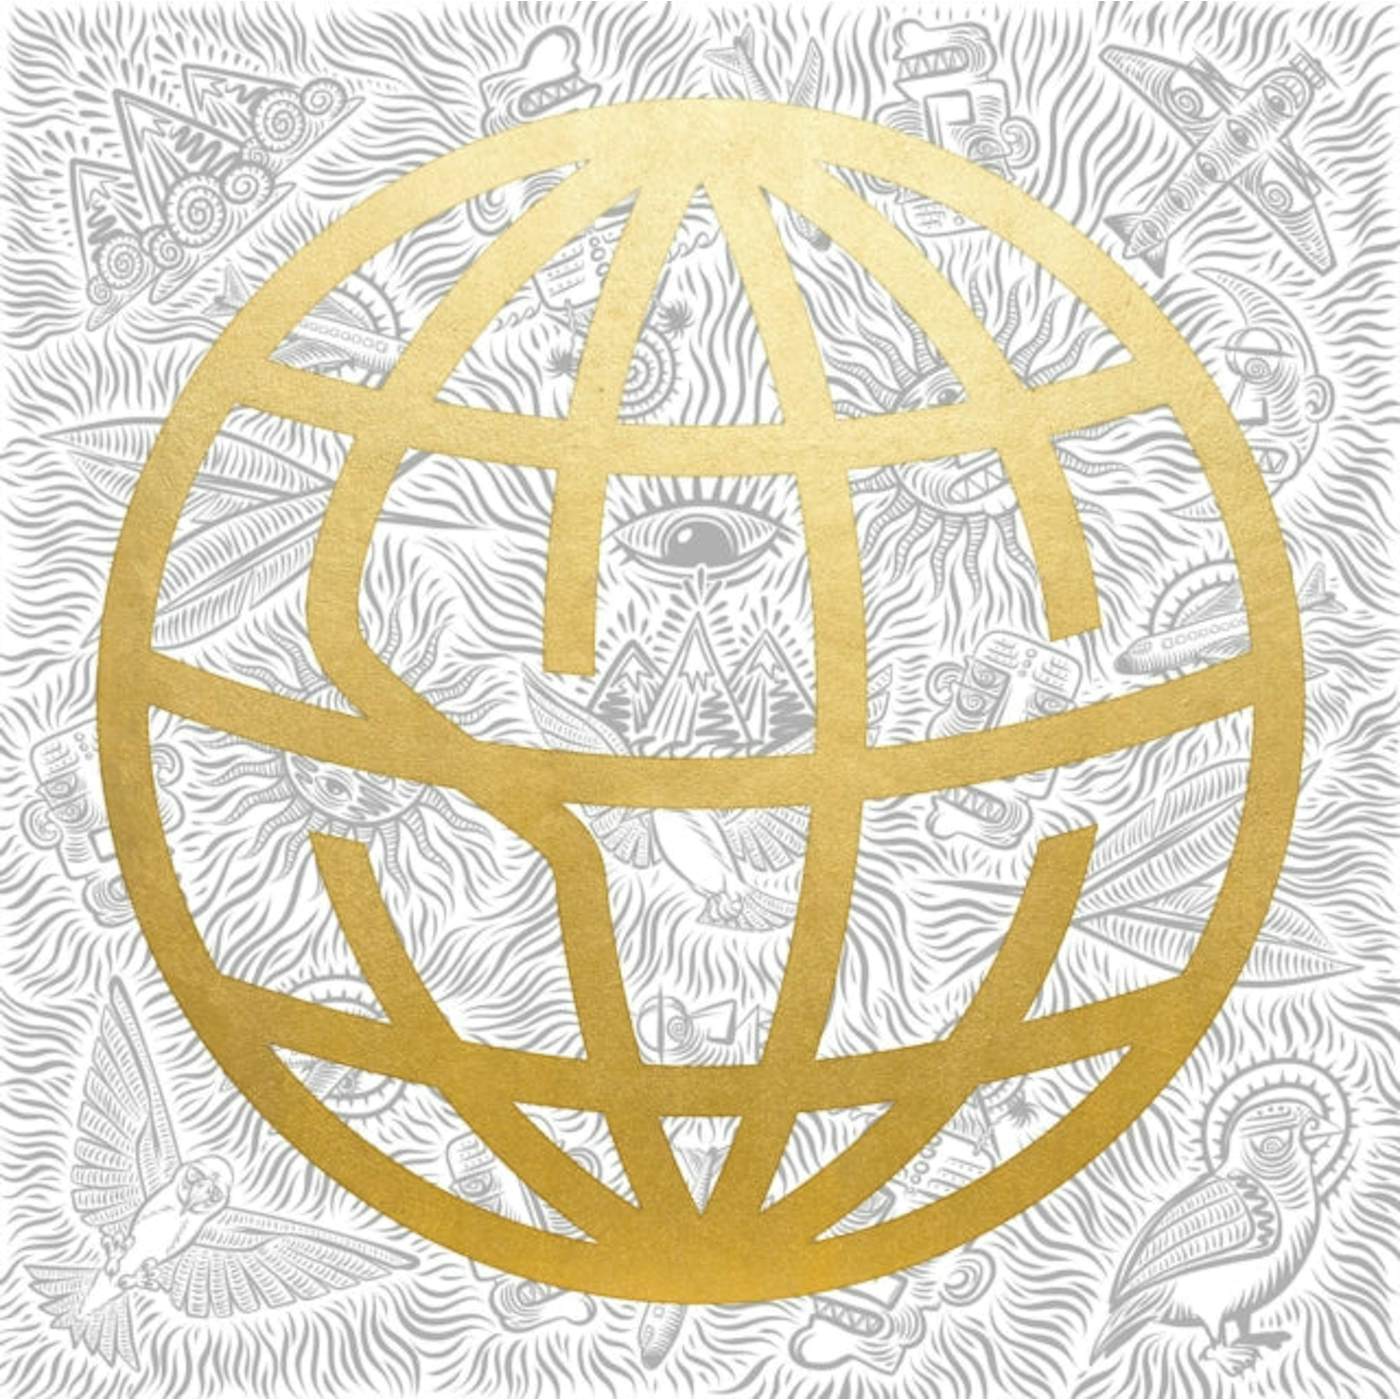 State Champs LP - Around The World And Back (Vinyl)